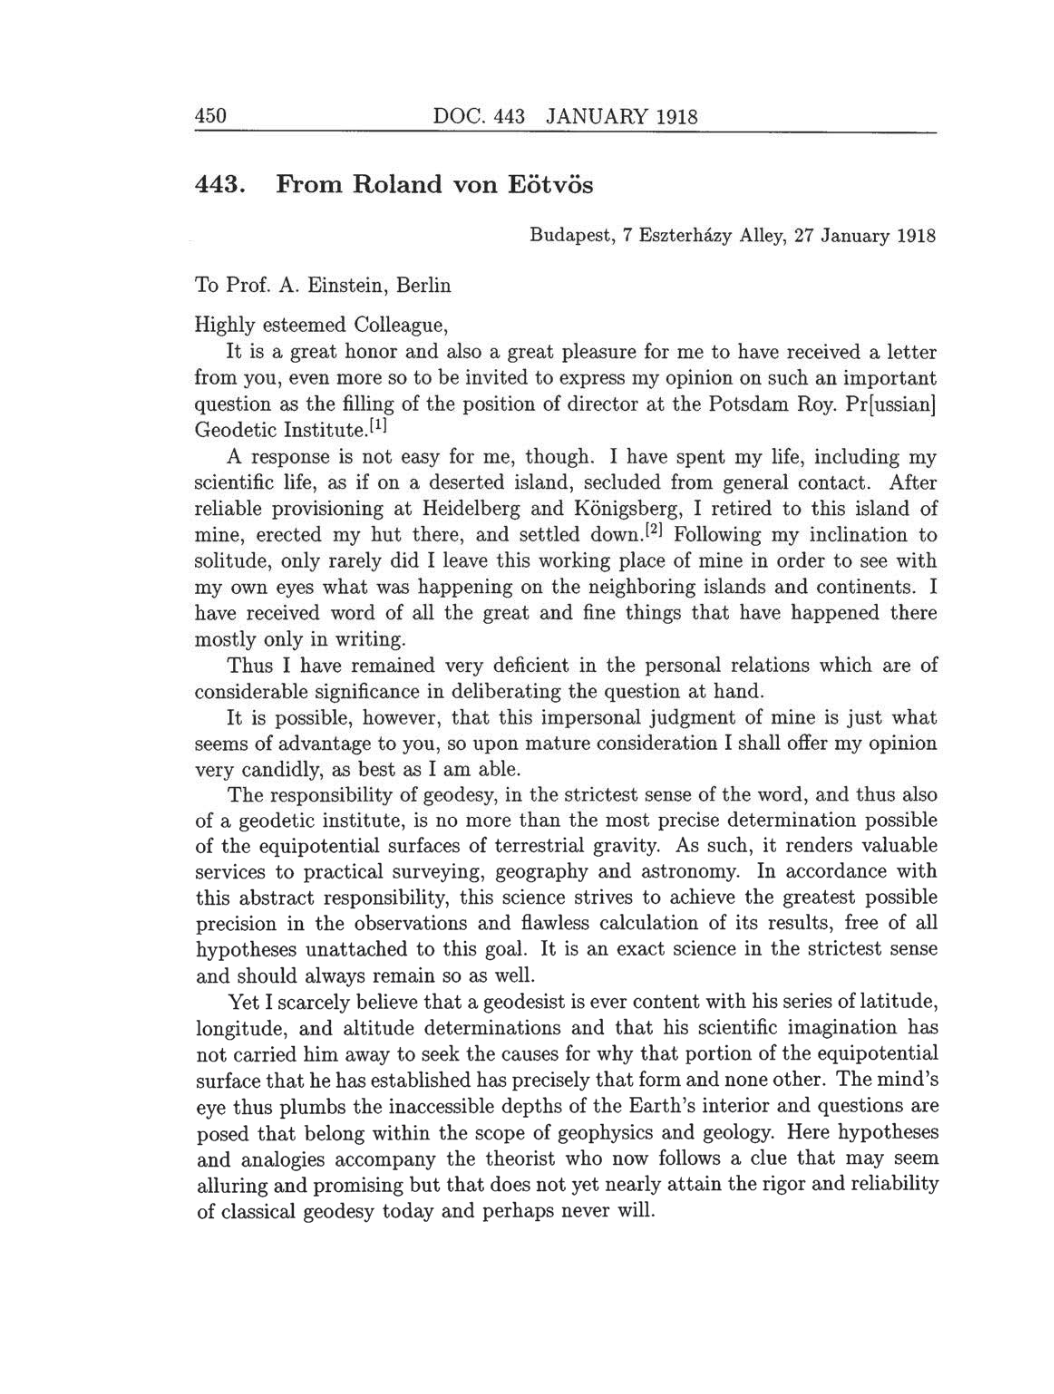 Volume 8: The Berlin Years: Correspondence, 1914-1918 (English translation supplement) page 450